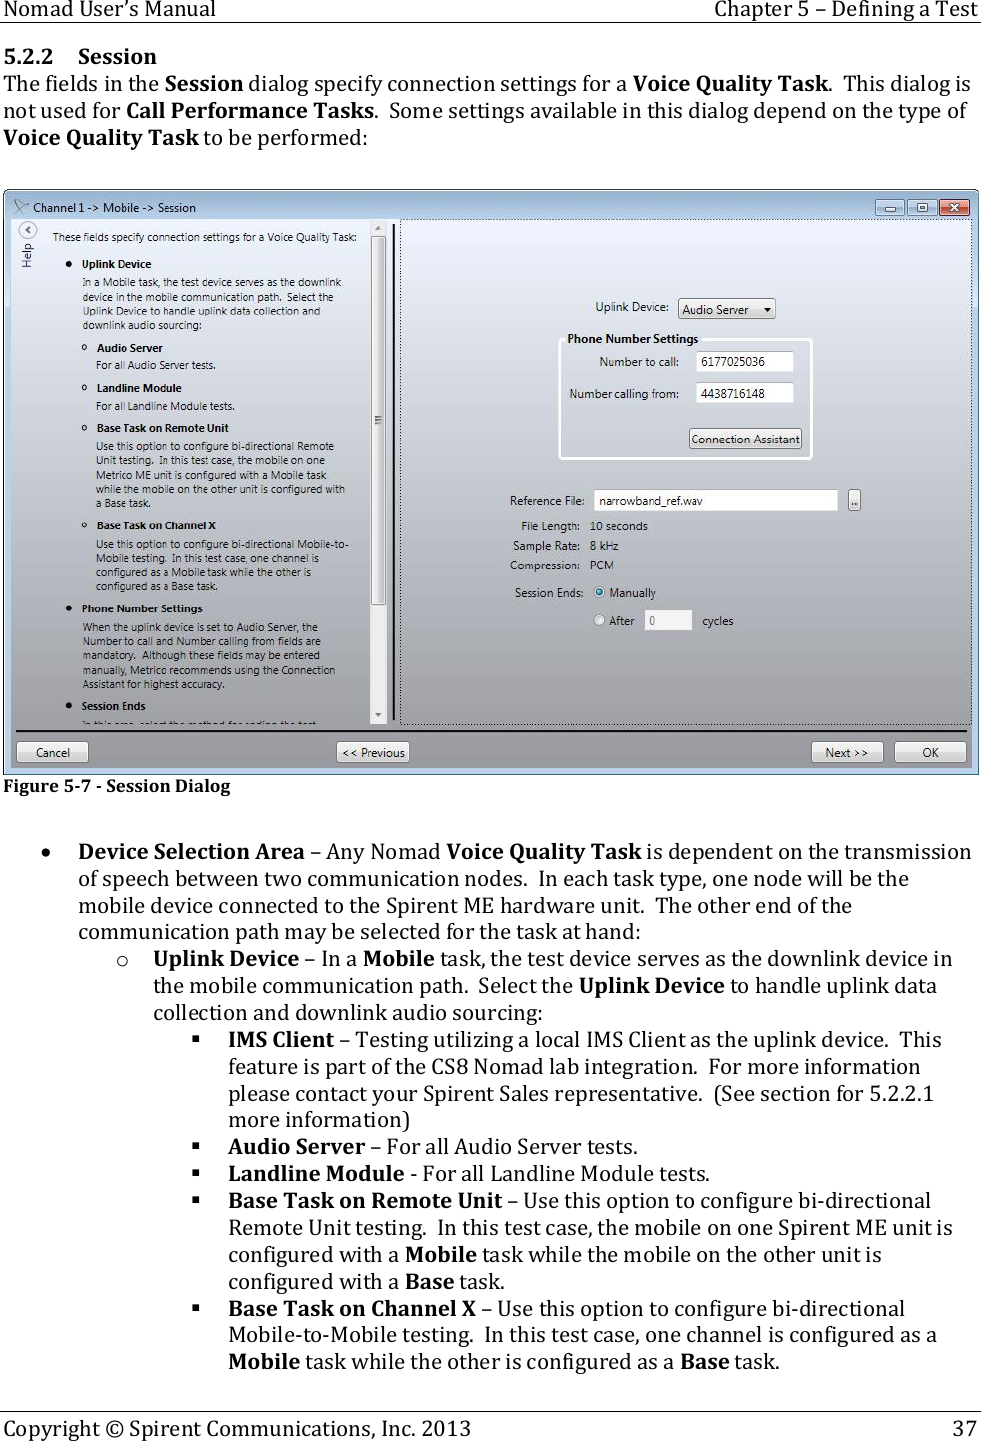  Nomad User’s Manual  Chapter 5 – Defining a Test Copyright © Spirent Communications, Inc. 2013    37  5.2.2 Session  The fields in the Session dialog specify connection settings for a Voice Quality Task.  This dialog is not used for Call Performance Tasks.  Some settings available in this dialog depend on the type of Voice Quality Task to be performed:   Figure 5-7 - Session Dialog   Device Selection Area – Any Nomad Voice Quality Task is dependent on the transmission of speech between two communication nodes.  In each task type, one node will be the mobile device connected to the Spirent ME hardware unit.  The other end of the communication path may be selected for the task at hand: o Uplink Device – In a Mobile task, the test device serves as the downlink device in the mobile communication path.  Select the Uplink Device to handle uplink data collection and downlink audio sourcing:  IMS Client – Testing utilizing a local IMS Client as the uplink device.  This feature is part of the CS8 Nomad lab integration.  For more information please contact your Spirent Sales representative.  (See section for 5.2.2.1 more information)  Audio Server – For all Audio Server tests.  Landline Module - For all Landline Module tests.  Base Task on Remote Unit – Use this option to configure bi-directional Remote Unit testing.  In this test case, the mobile on one Spirent ME unit is configured with a Mobile task while the mobile on the other unit is configured with a Base task.  Base Task on Channel X – Use this option to configure bi-directional Mobile-to-Mobile testing.  In this test case, one channel is configured as a Mobile task while the other is configured as a Base task. 